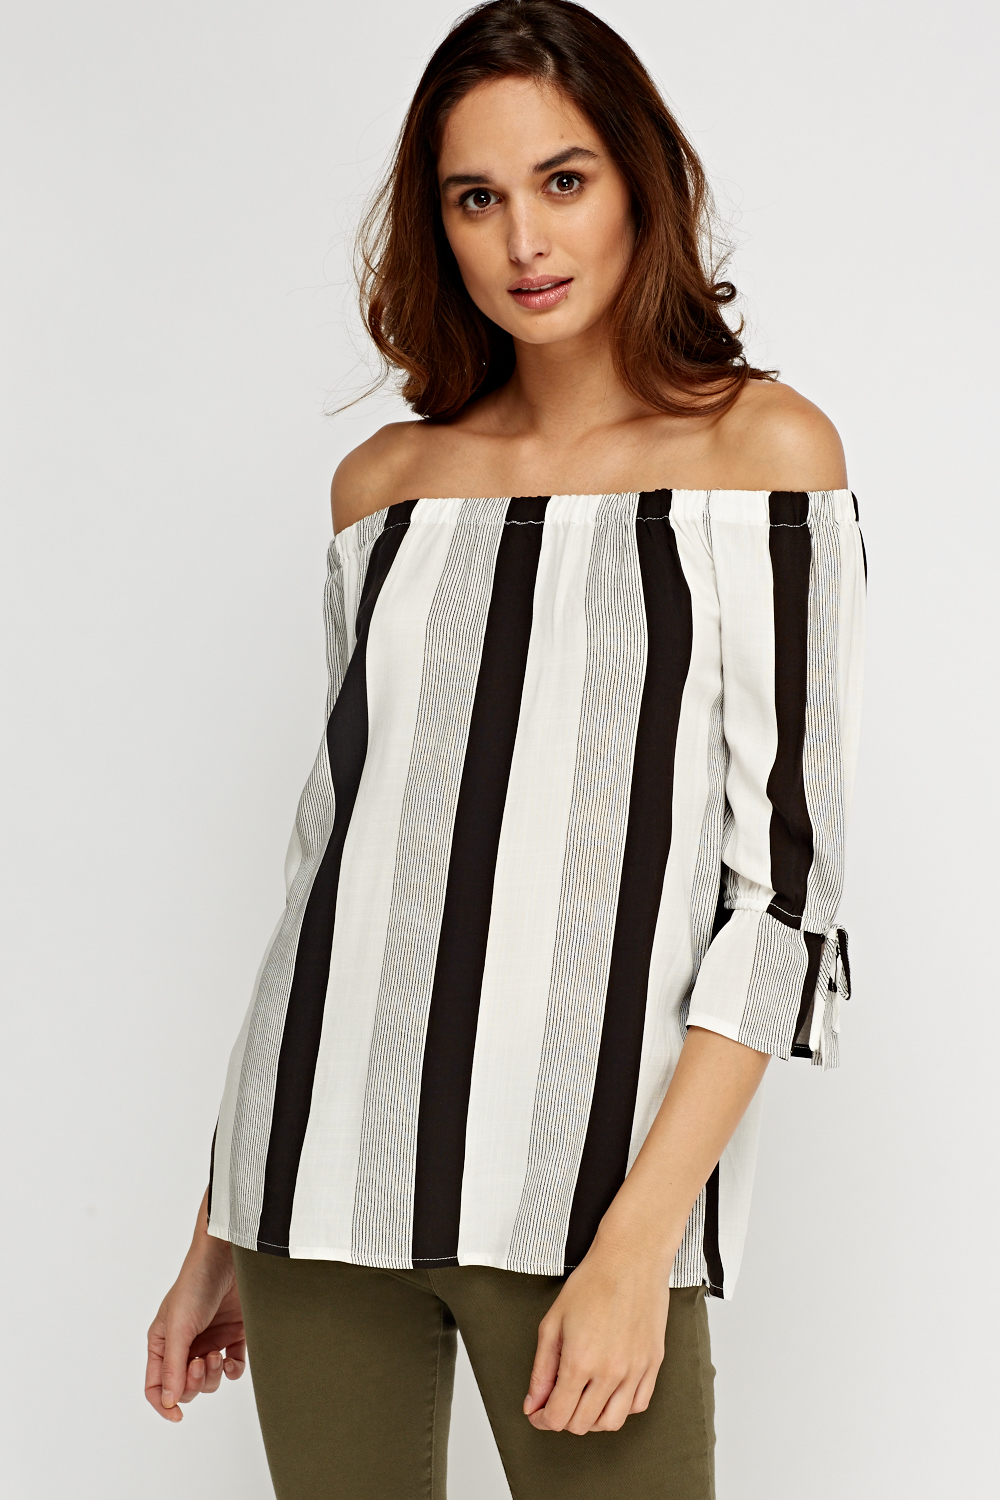 Striped Off Shoulder Top - White/Black or White/Pink - Just £5